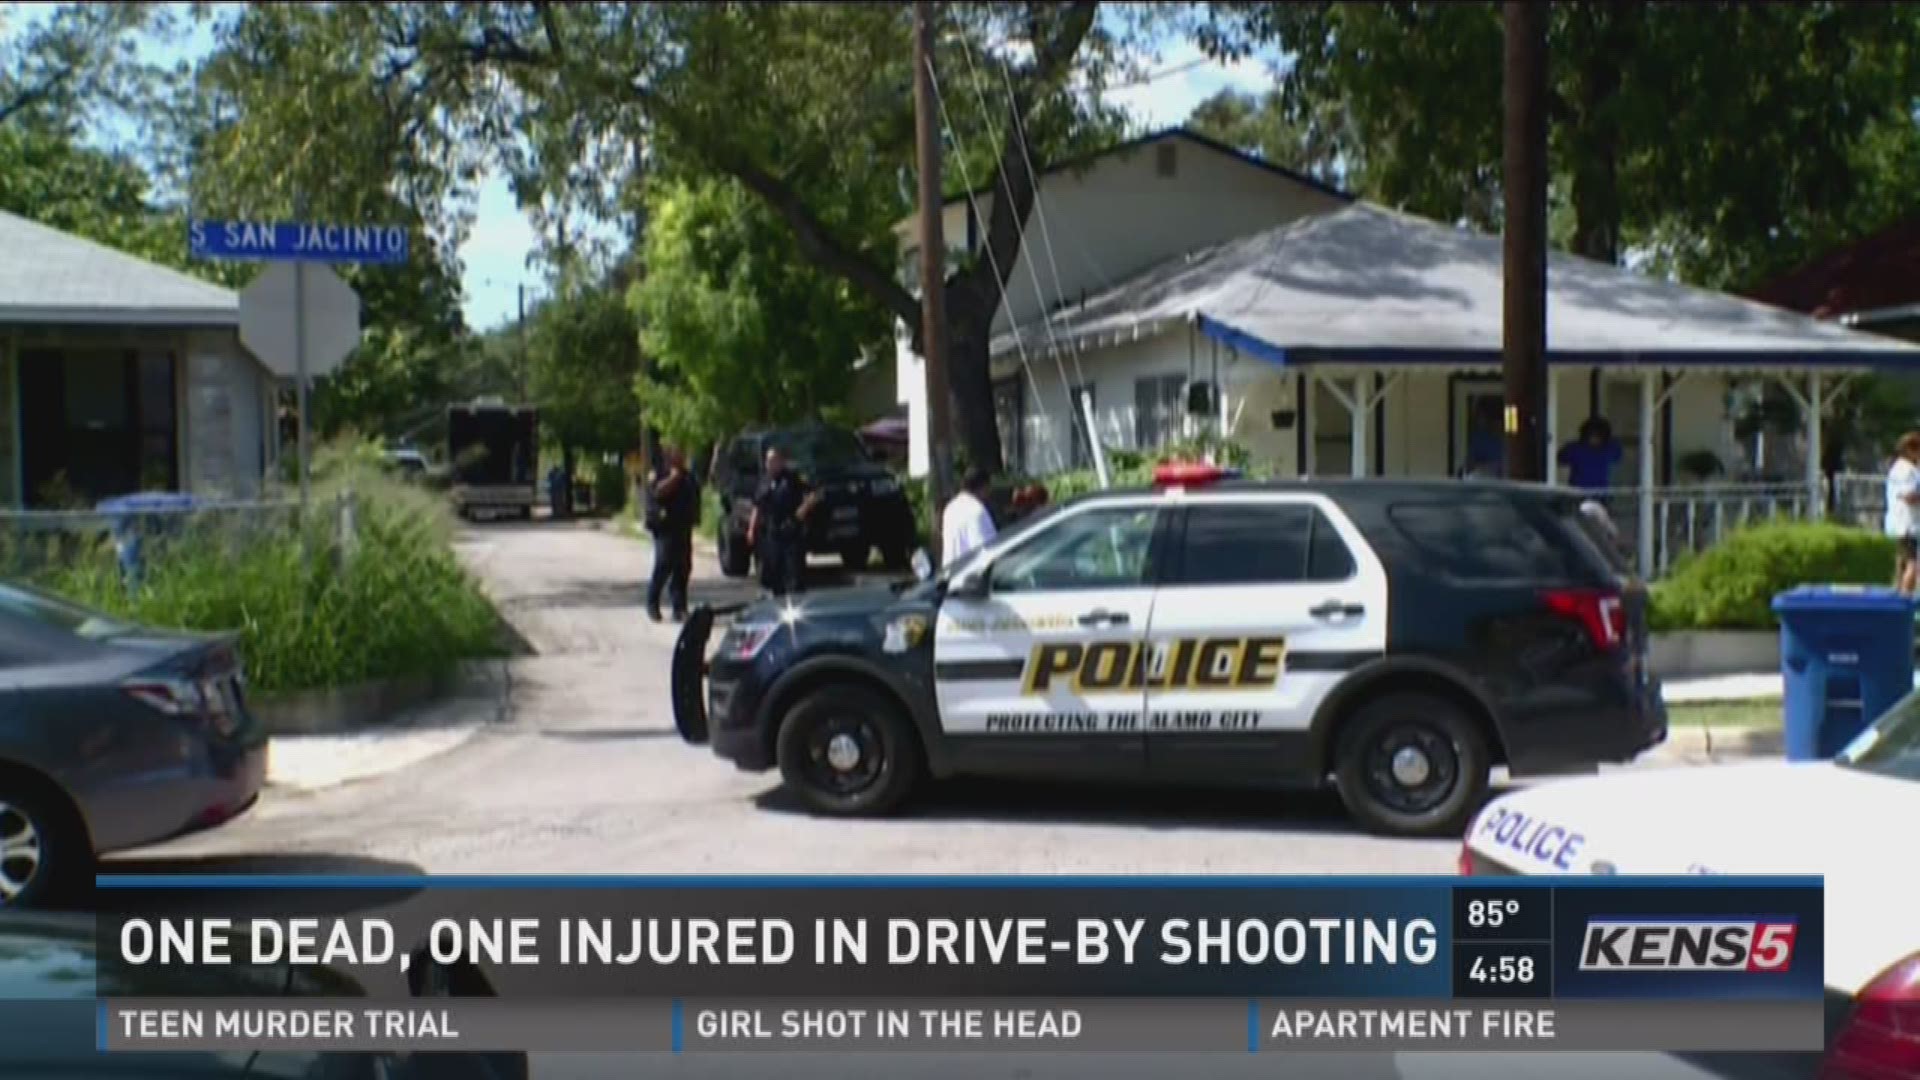 One dead, one injured in drive-by shooting